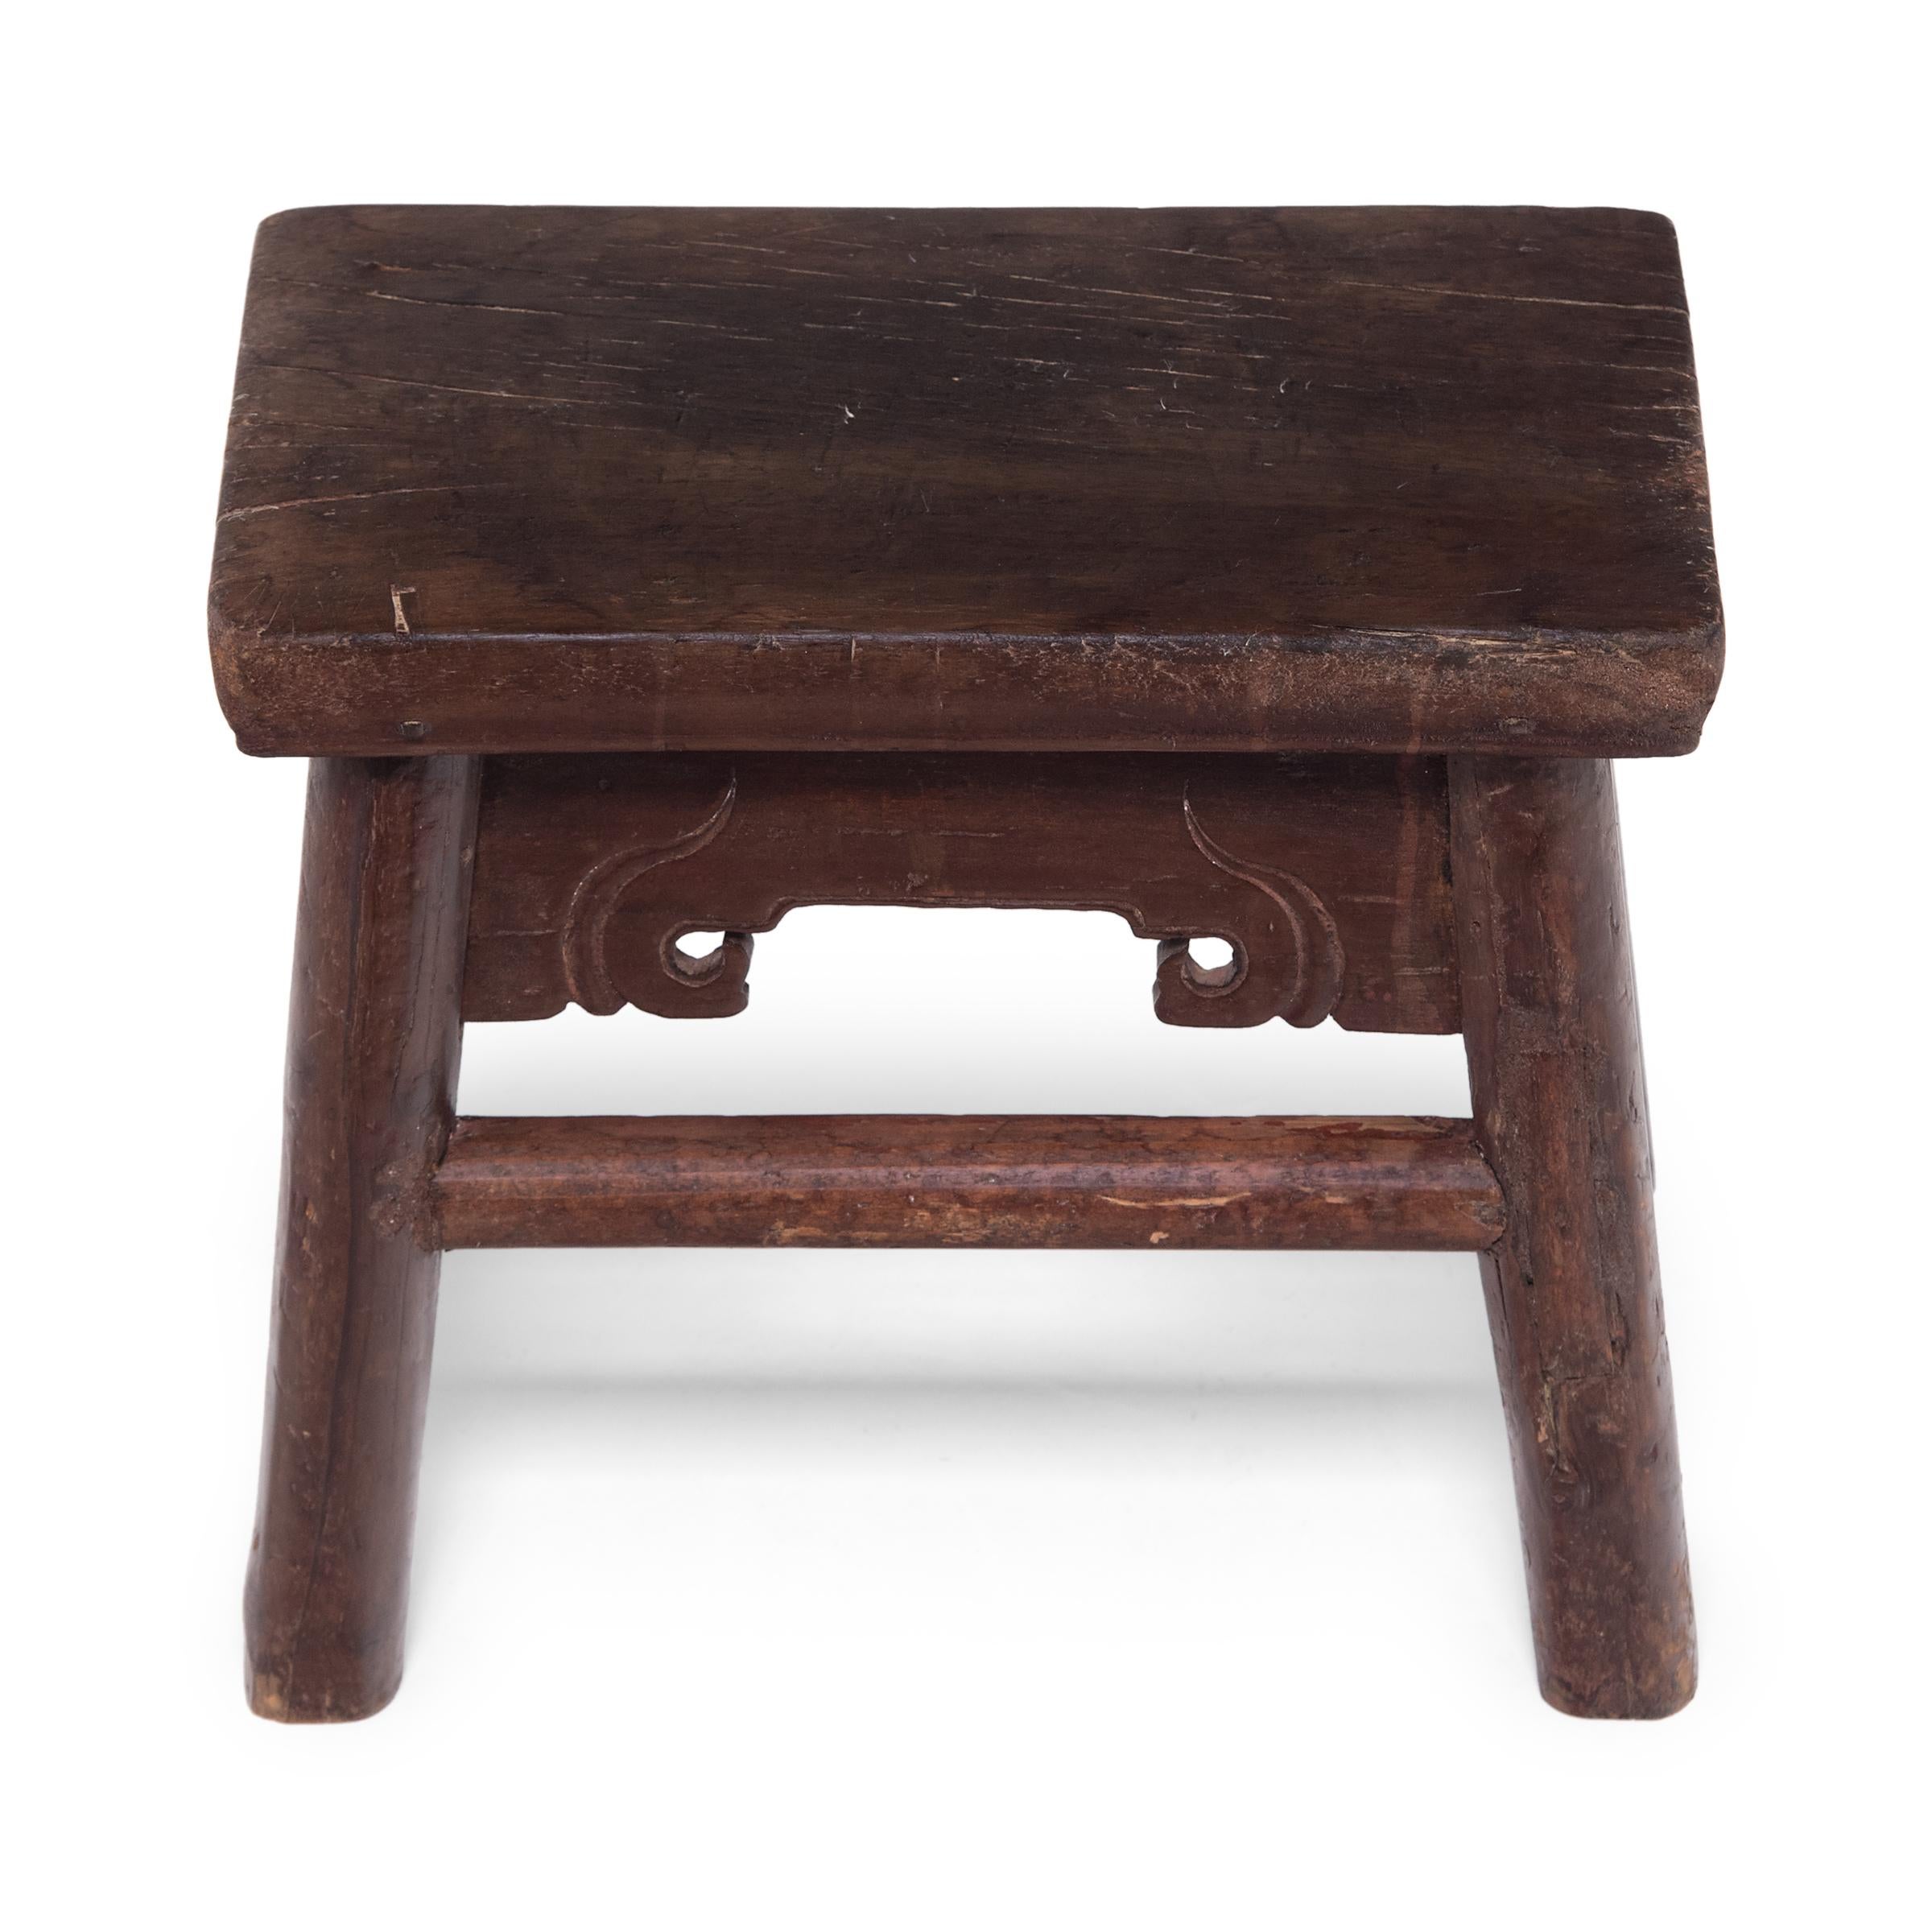 19th Century Low Provincial Chinese Stool, c. 1850